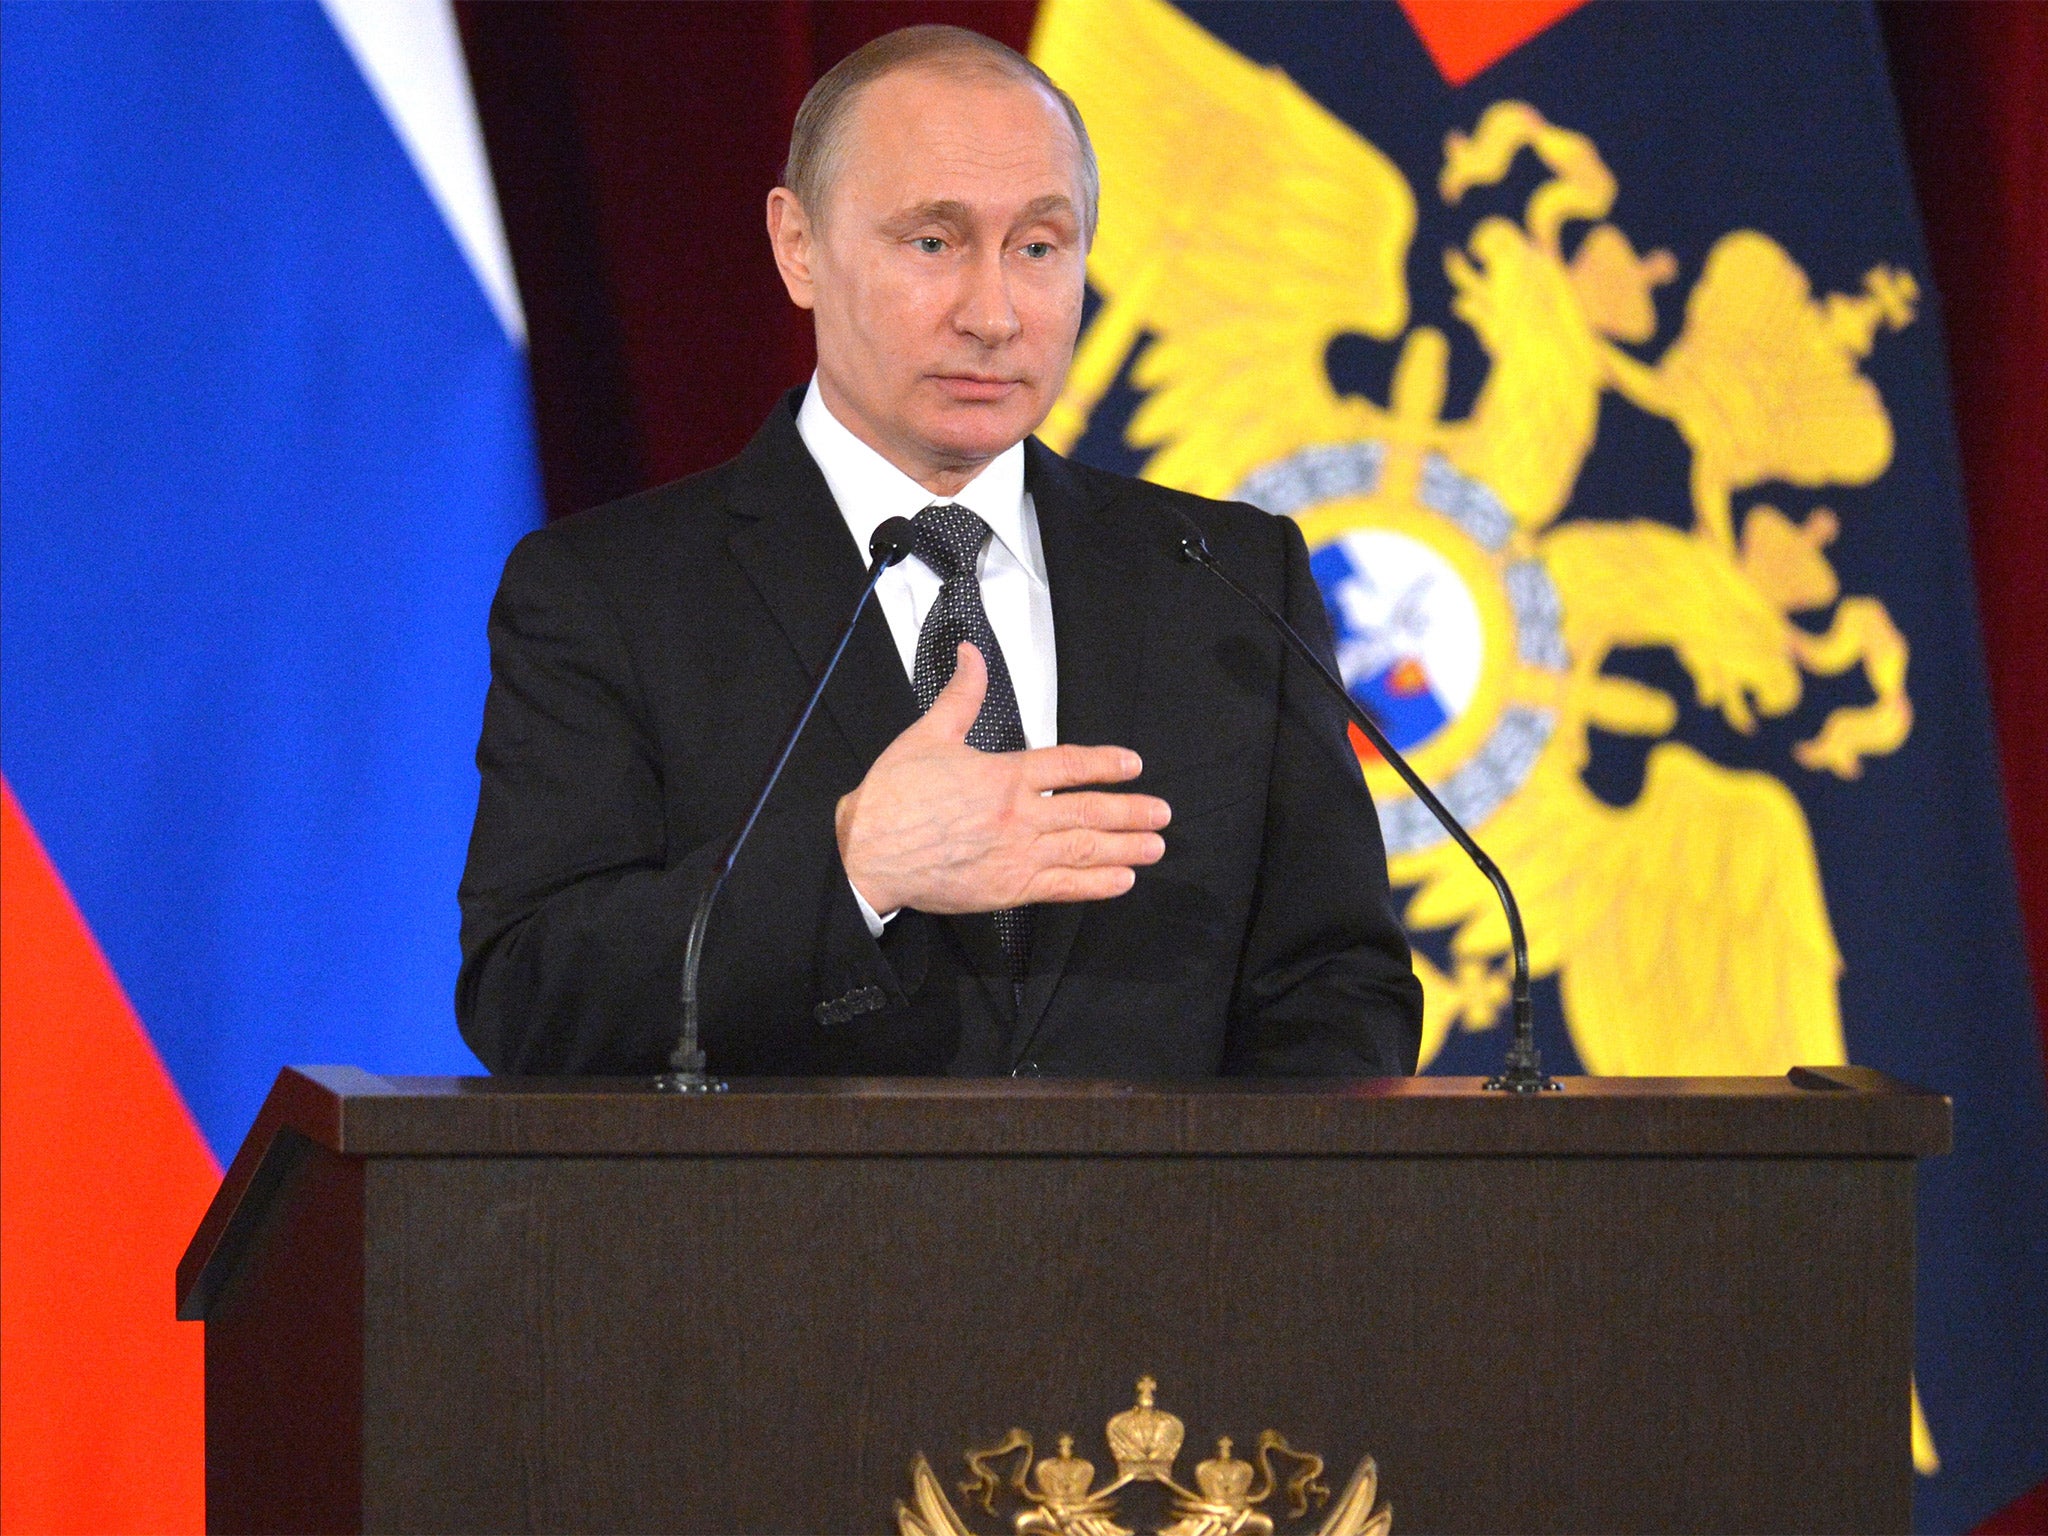 Russia President Vladimir Putin delivers an address in Moscow on Tuesday